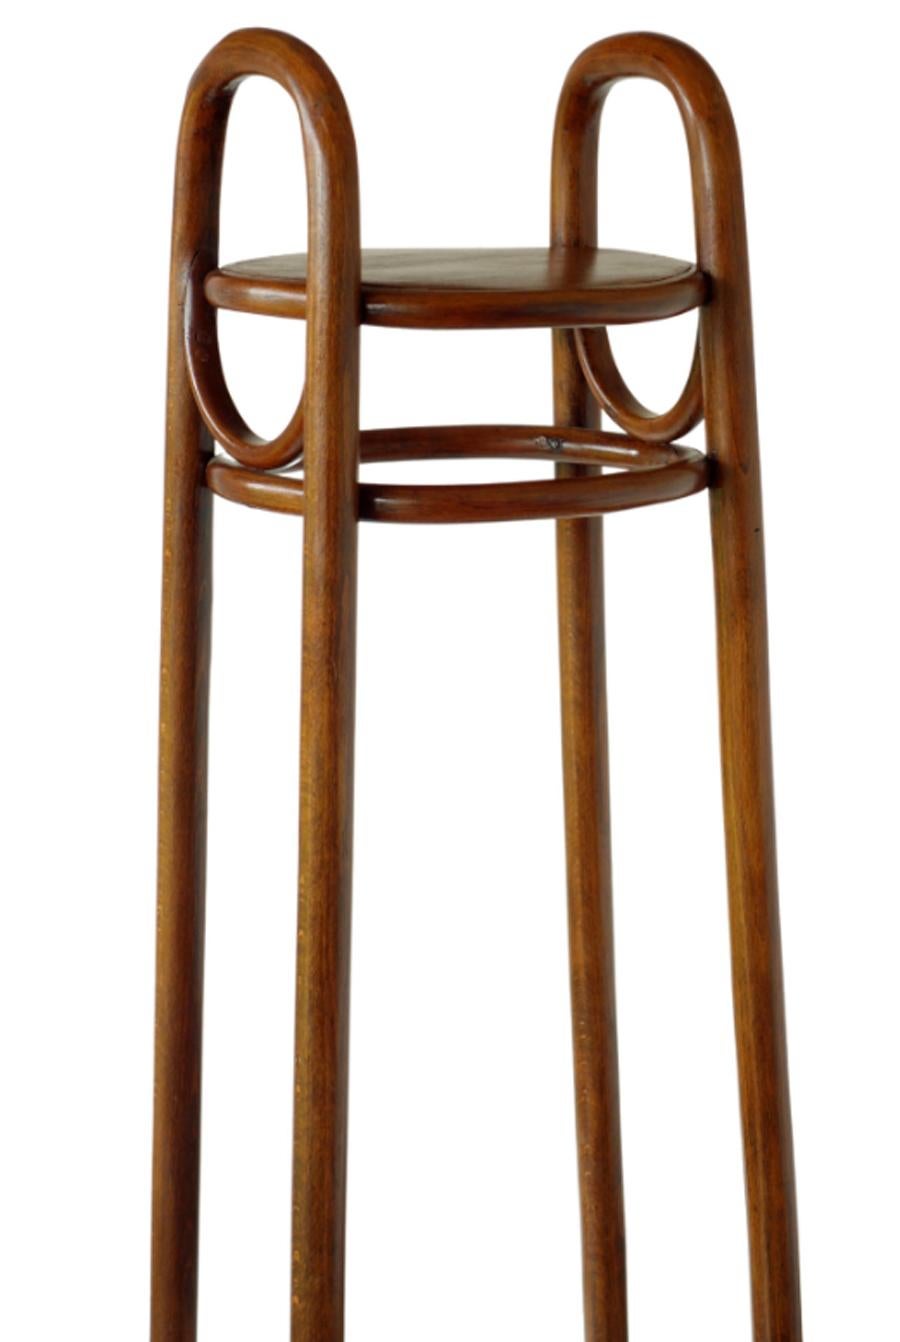 Jacob & Josef Kohn 1890s Secessionist Art Nouveau Bentwood Stand In Excellent Condition For Sale In Brescia, IT